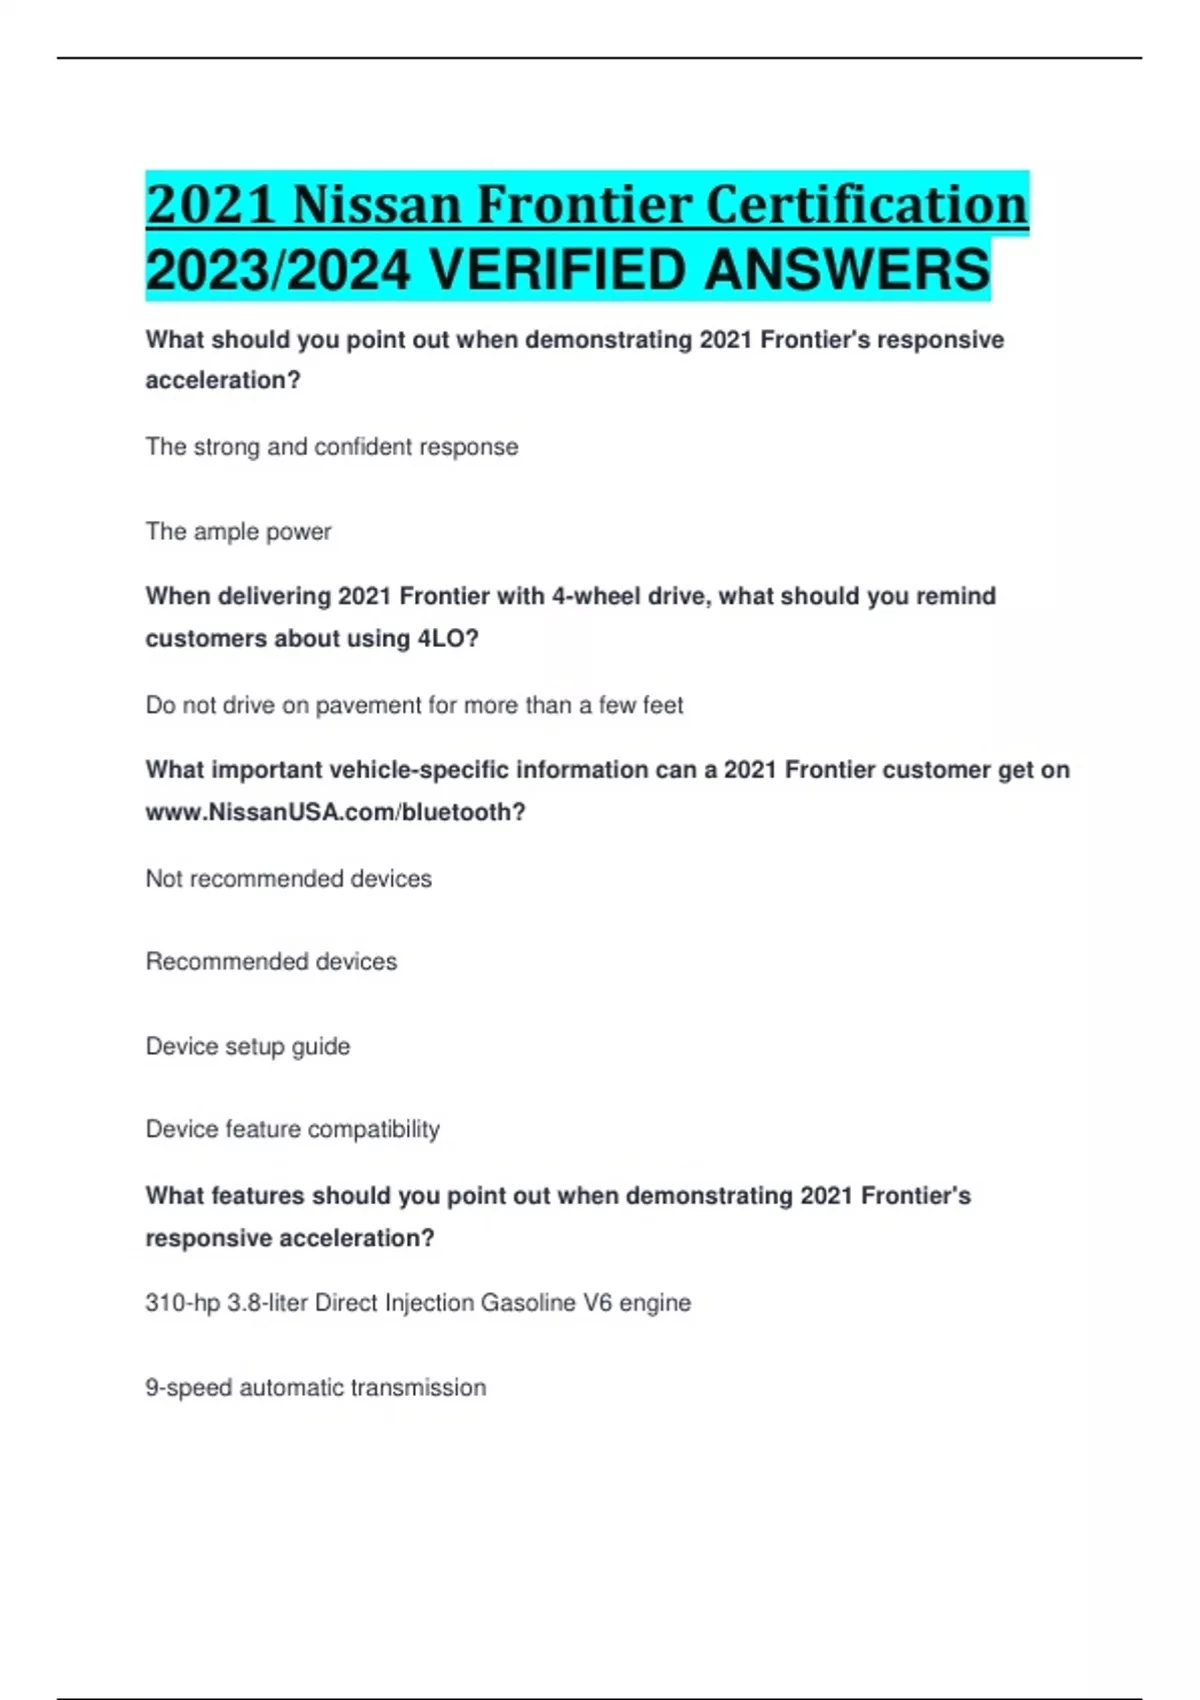 2021 Nissan Frontier Certification 2023/2024 VERIFIED ANSWERS NISSAN